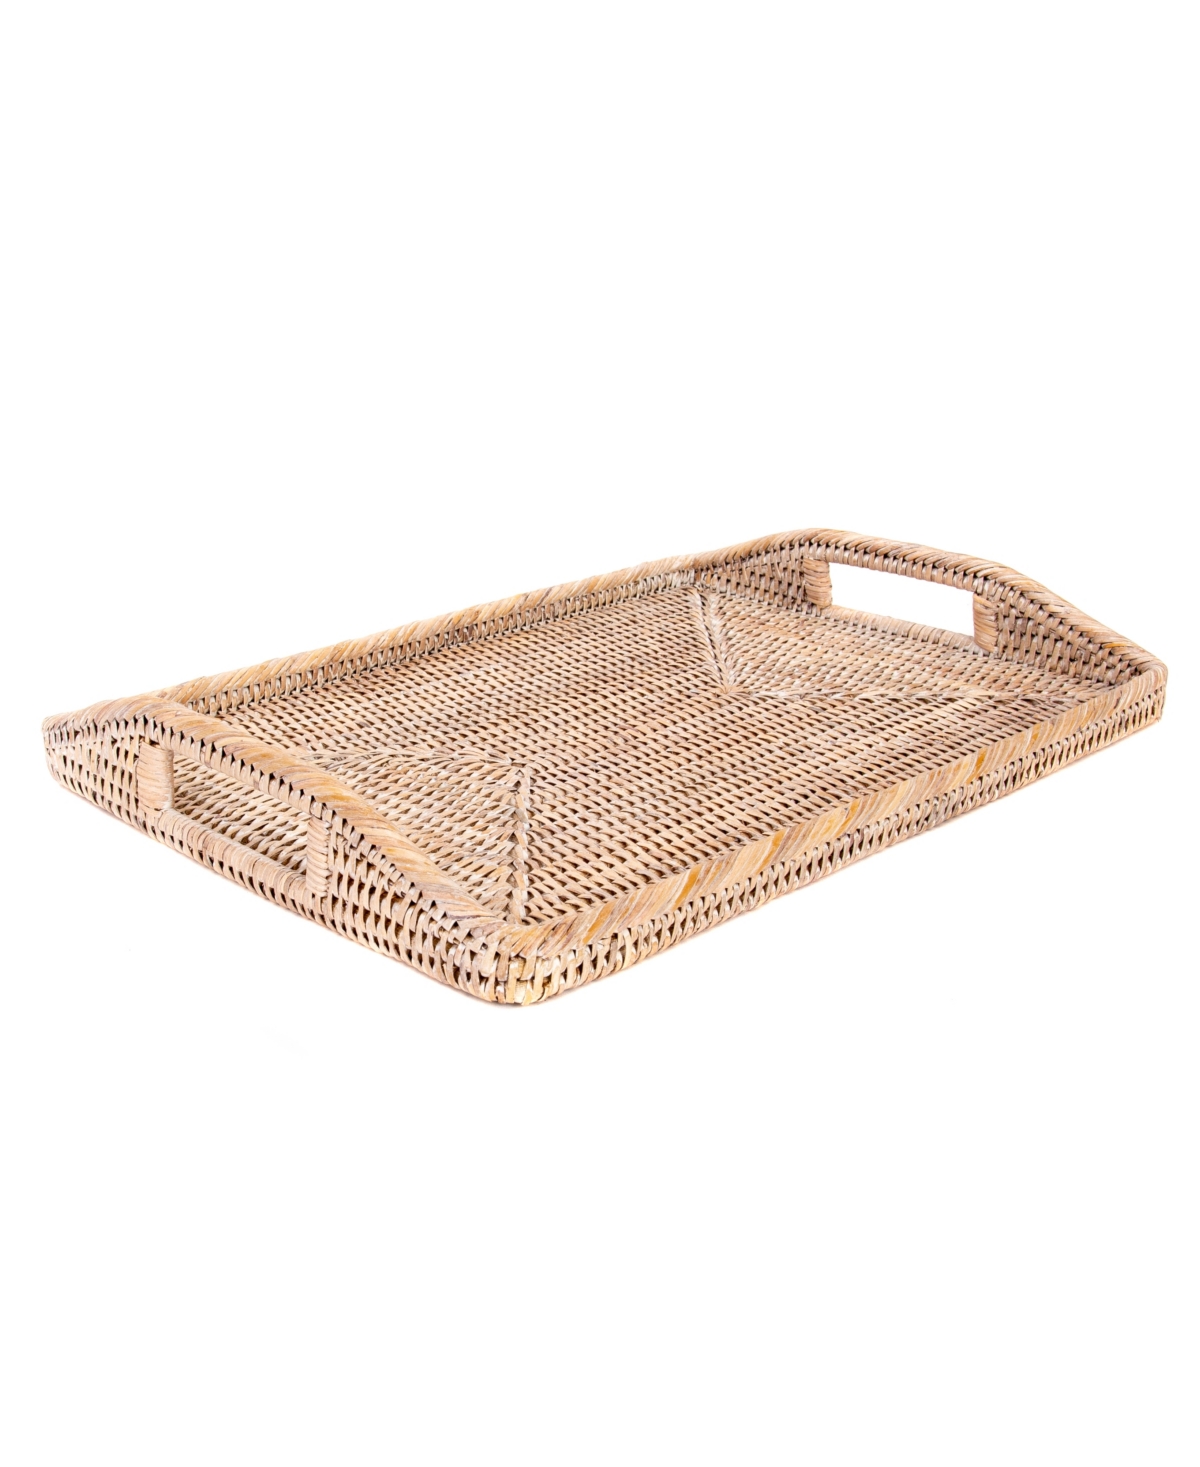 Shop Artifacts Trading Company Artifacts Rattan 14" Rectangular Tray In Off-white